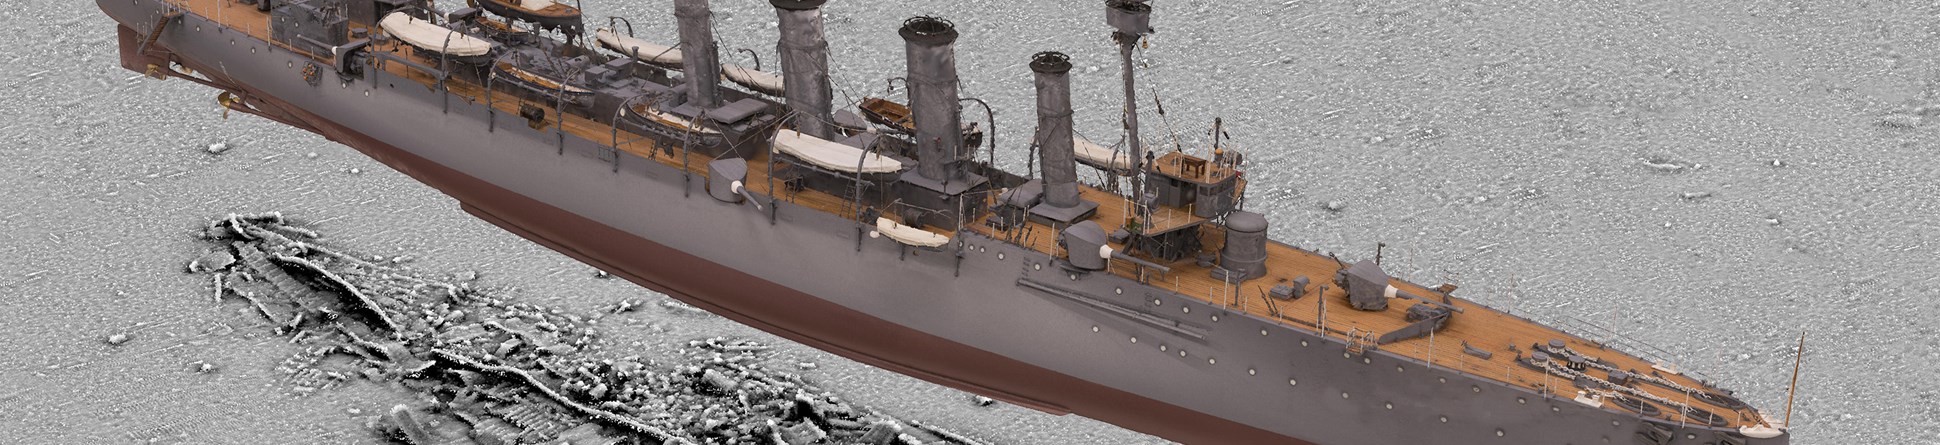 A 3D scan of HMS Falmouth by Historic England's imaging team superimposed on a seabed survey of the wreck. The survey was carried out in partnership with the Maritime and Coastguard Agency © Historic England